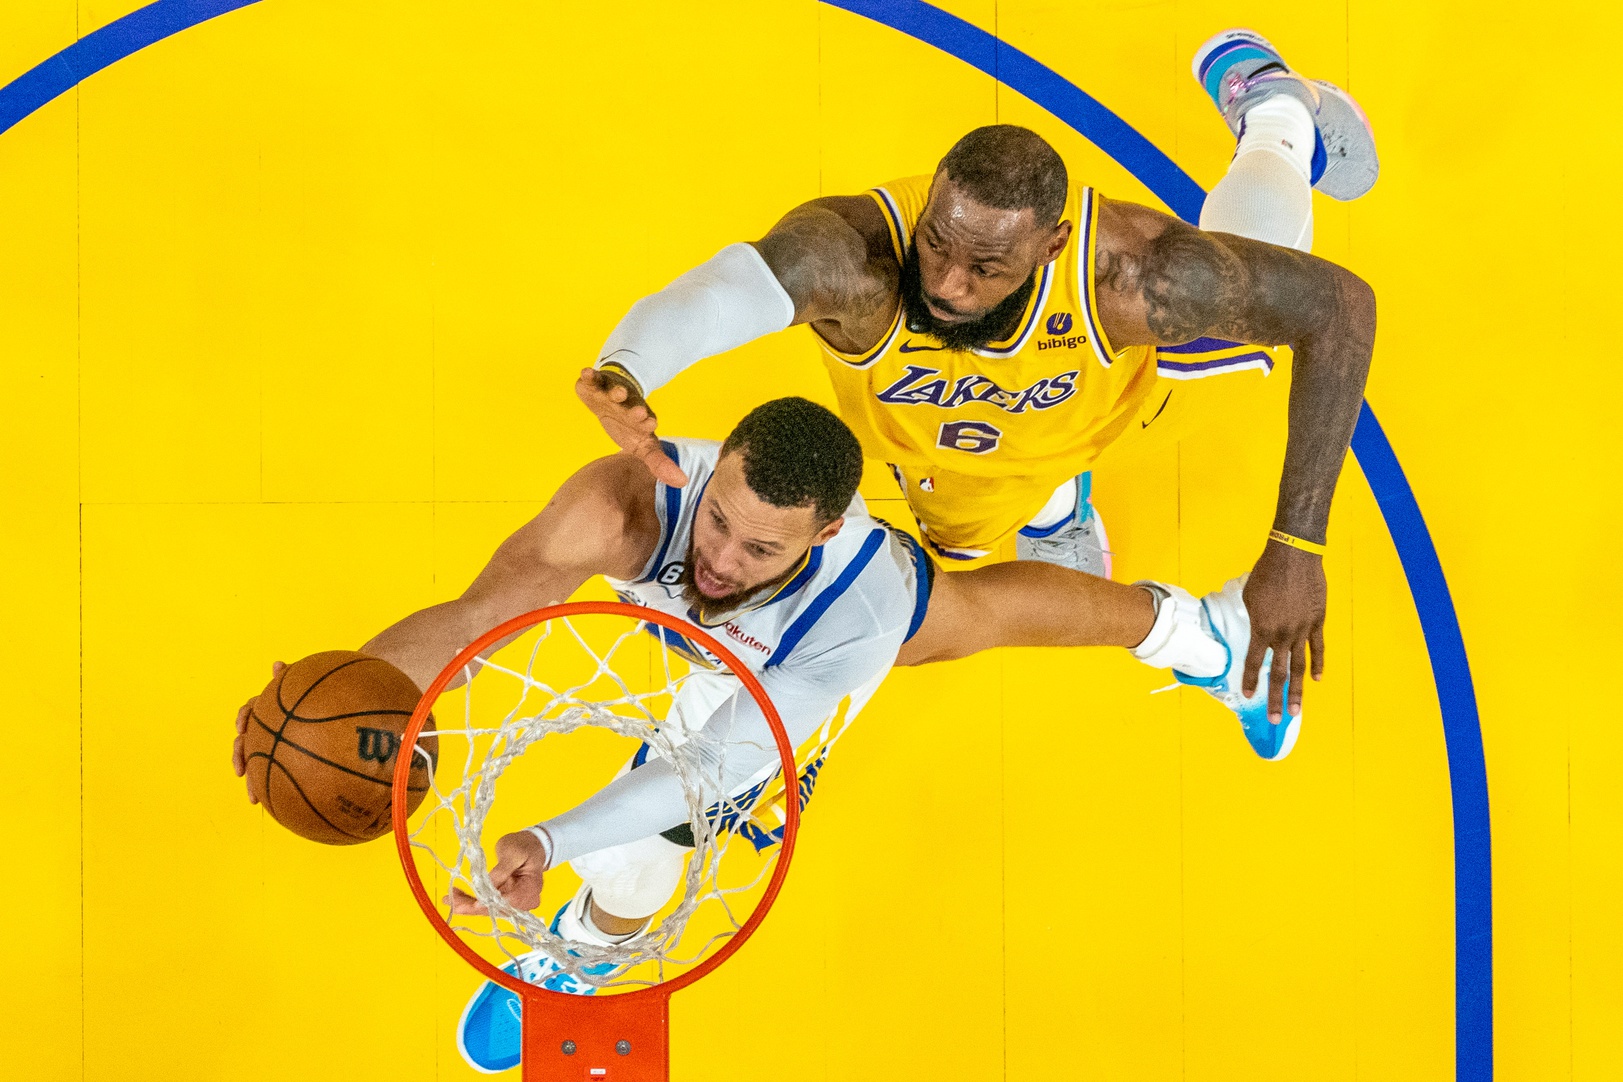 May 10, 2023; San Francisco, California, USA; Golden State Warriors guard Stephen Curry (30) shoots the basketball against Los Angeles Lakers forward LeBron James (6) during the second half in game five of the 2023 NBA playoffs conference semifinals round at Chase Center. Mandatory Credit: Kyle Terada-USA TODAY Sports. This could be a potential NBA Christmas match-up